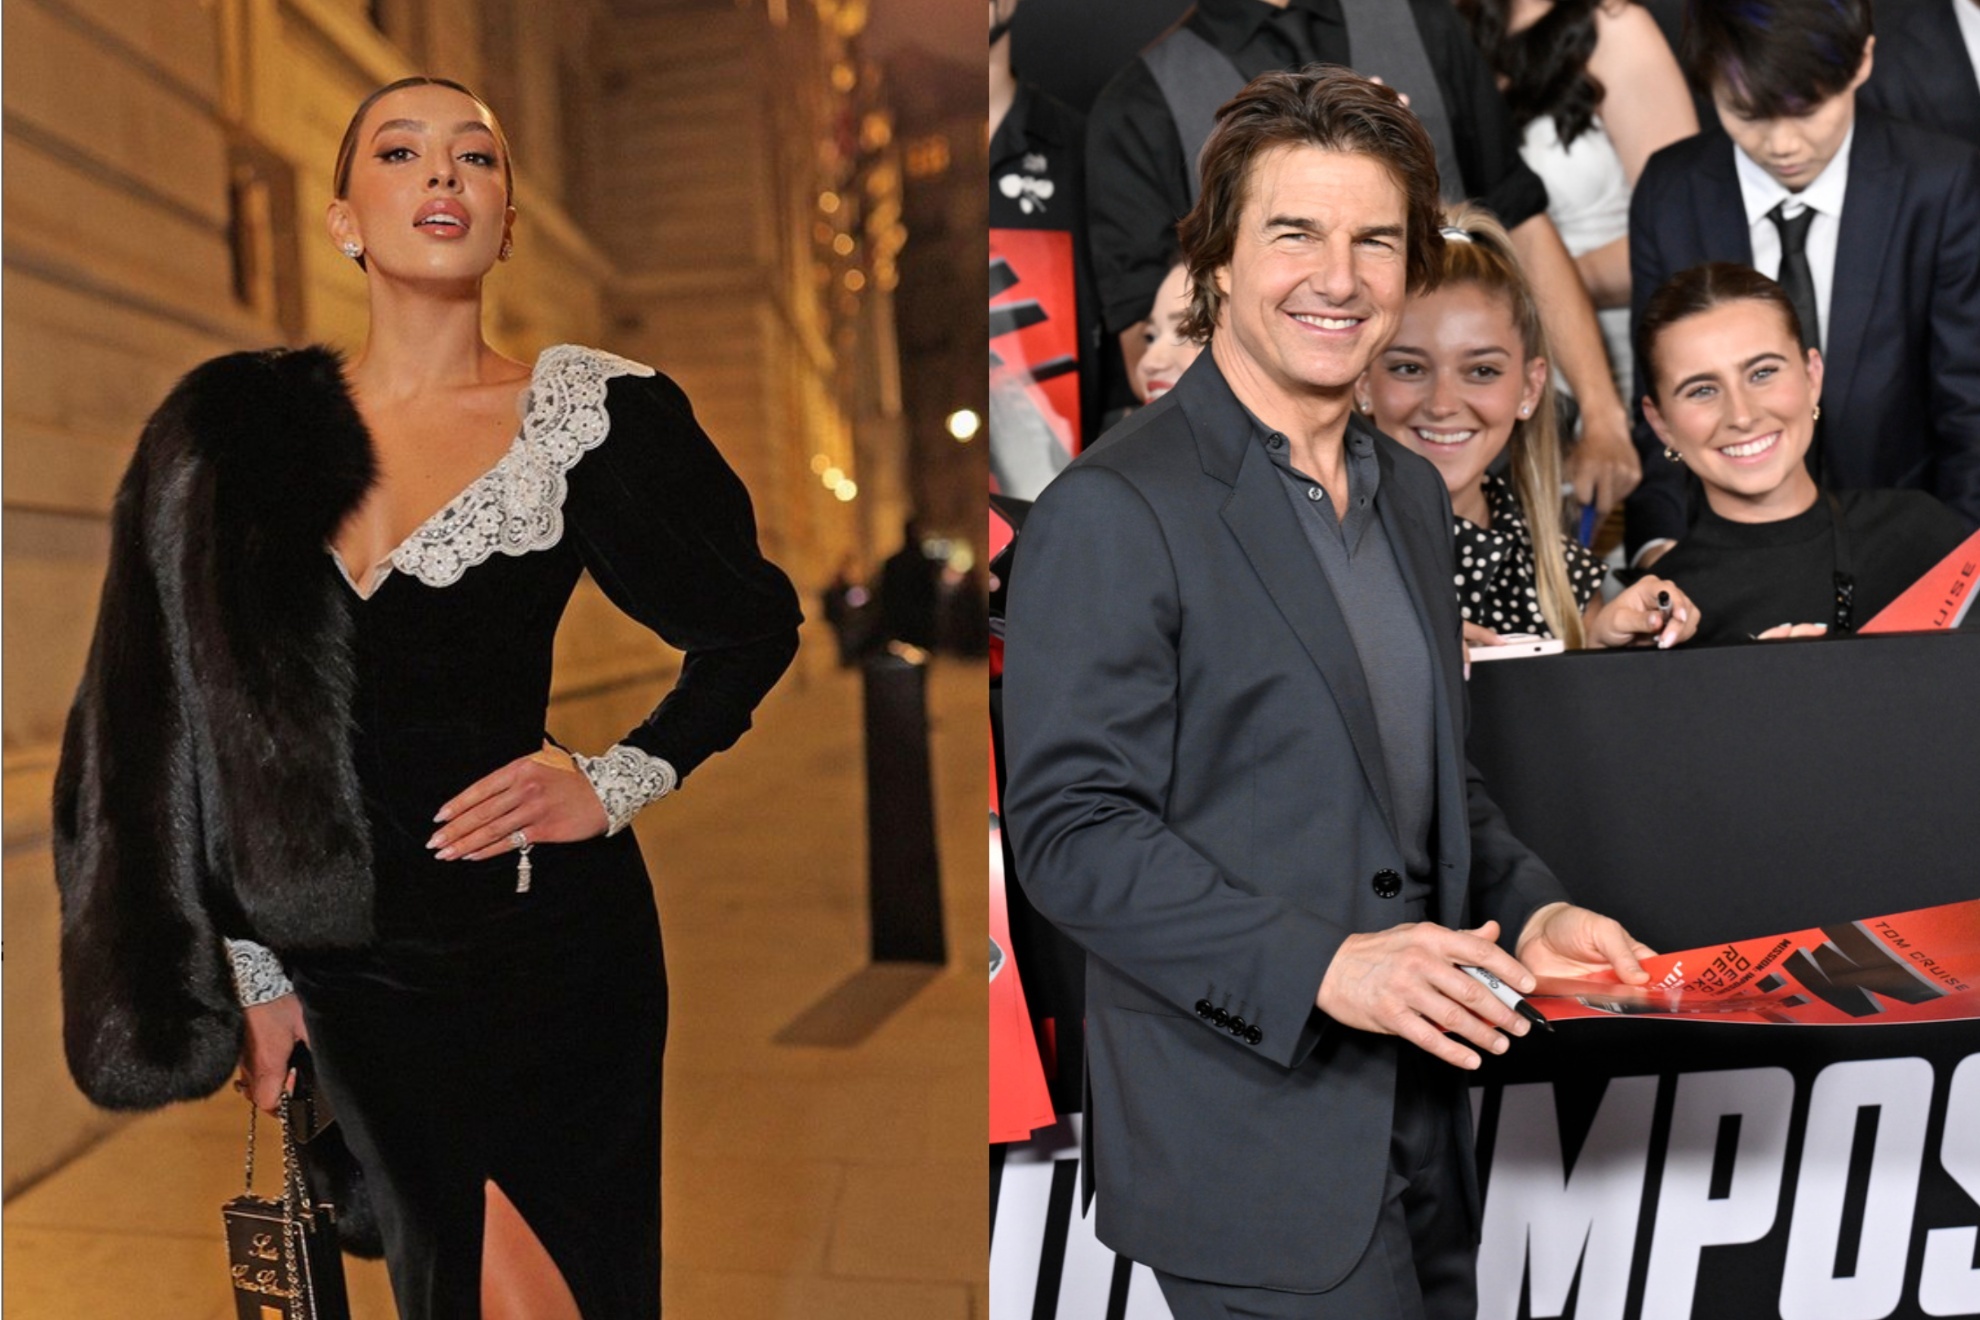 Tom Cruise and Elsina Khayrova started dating in December, according to rumors.